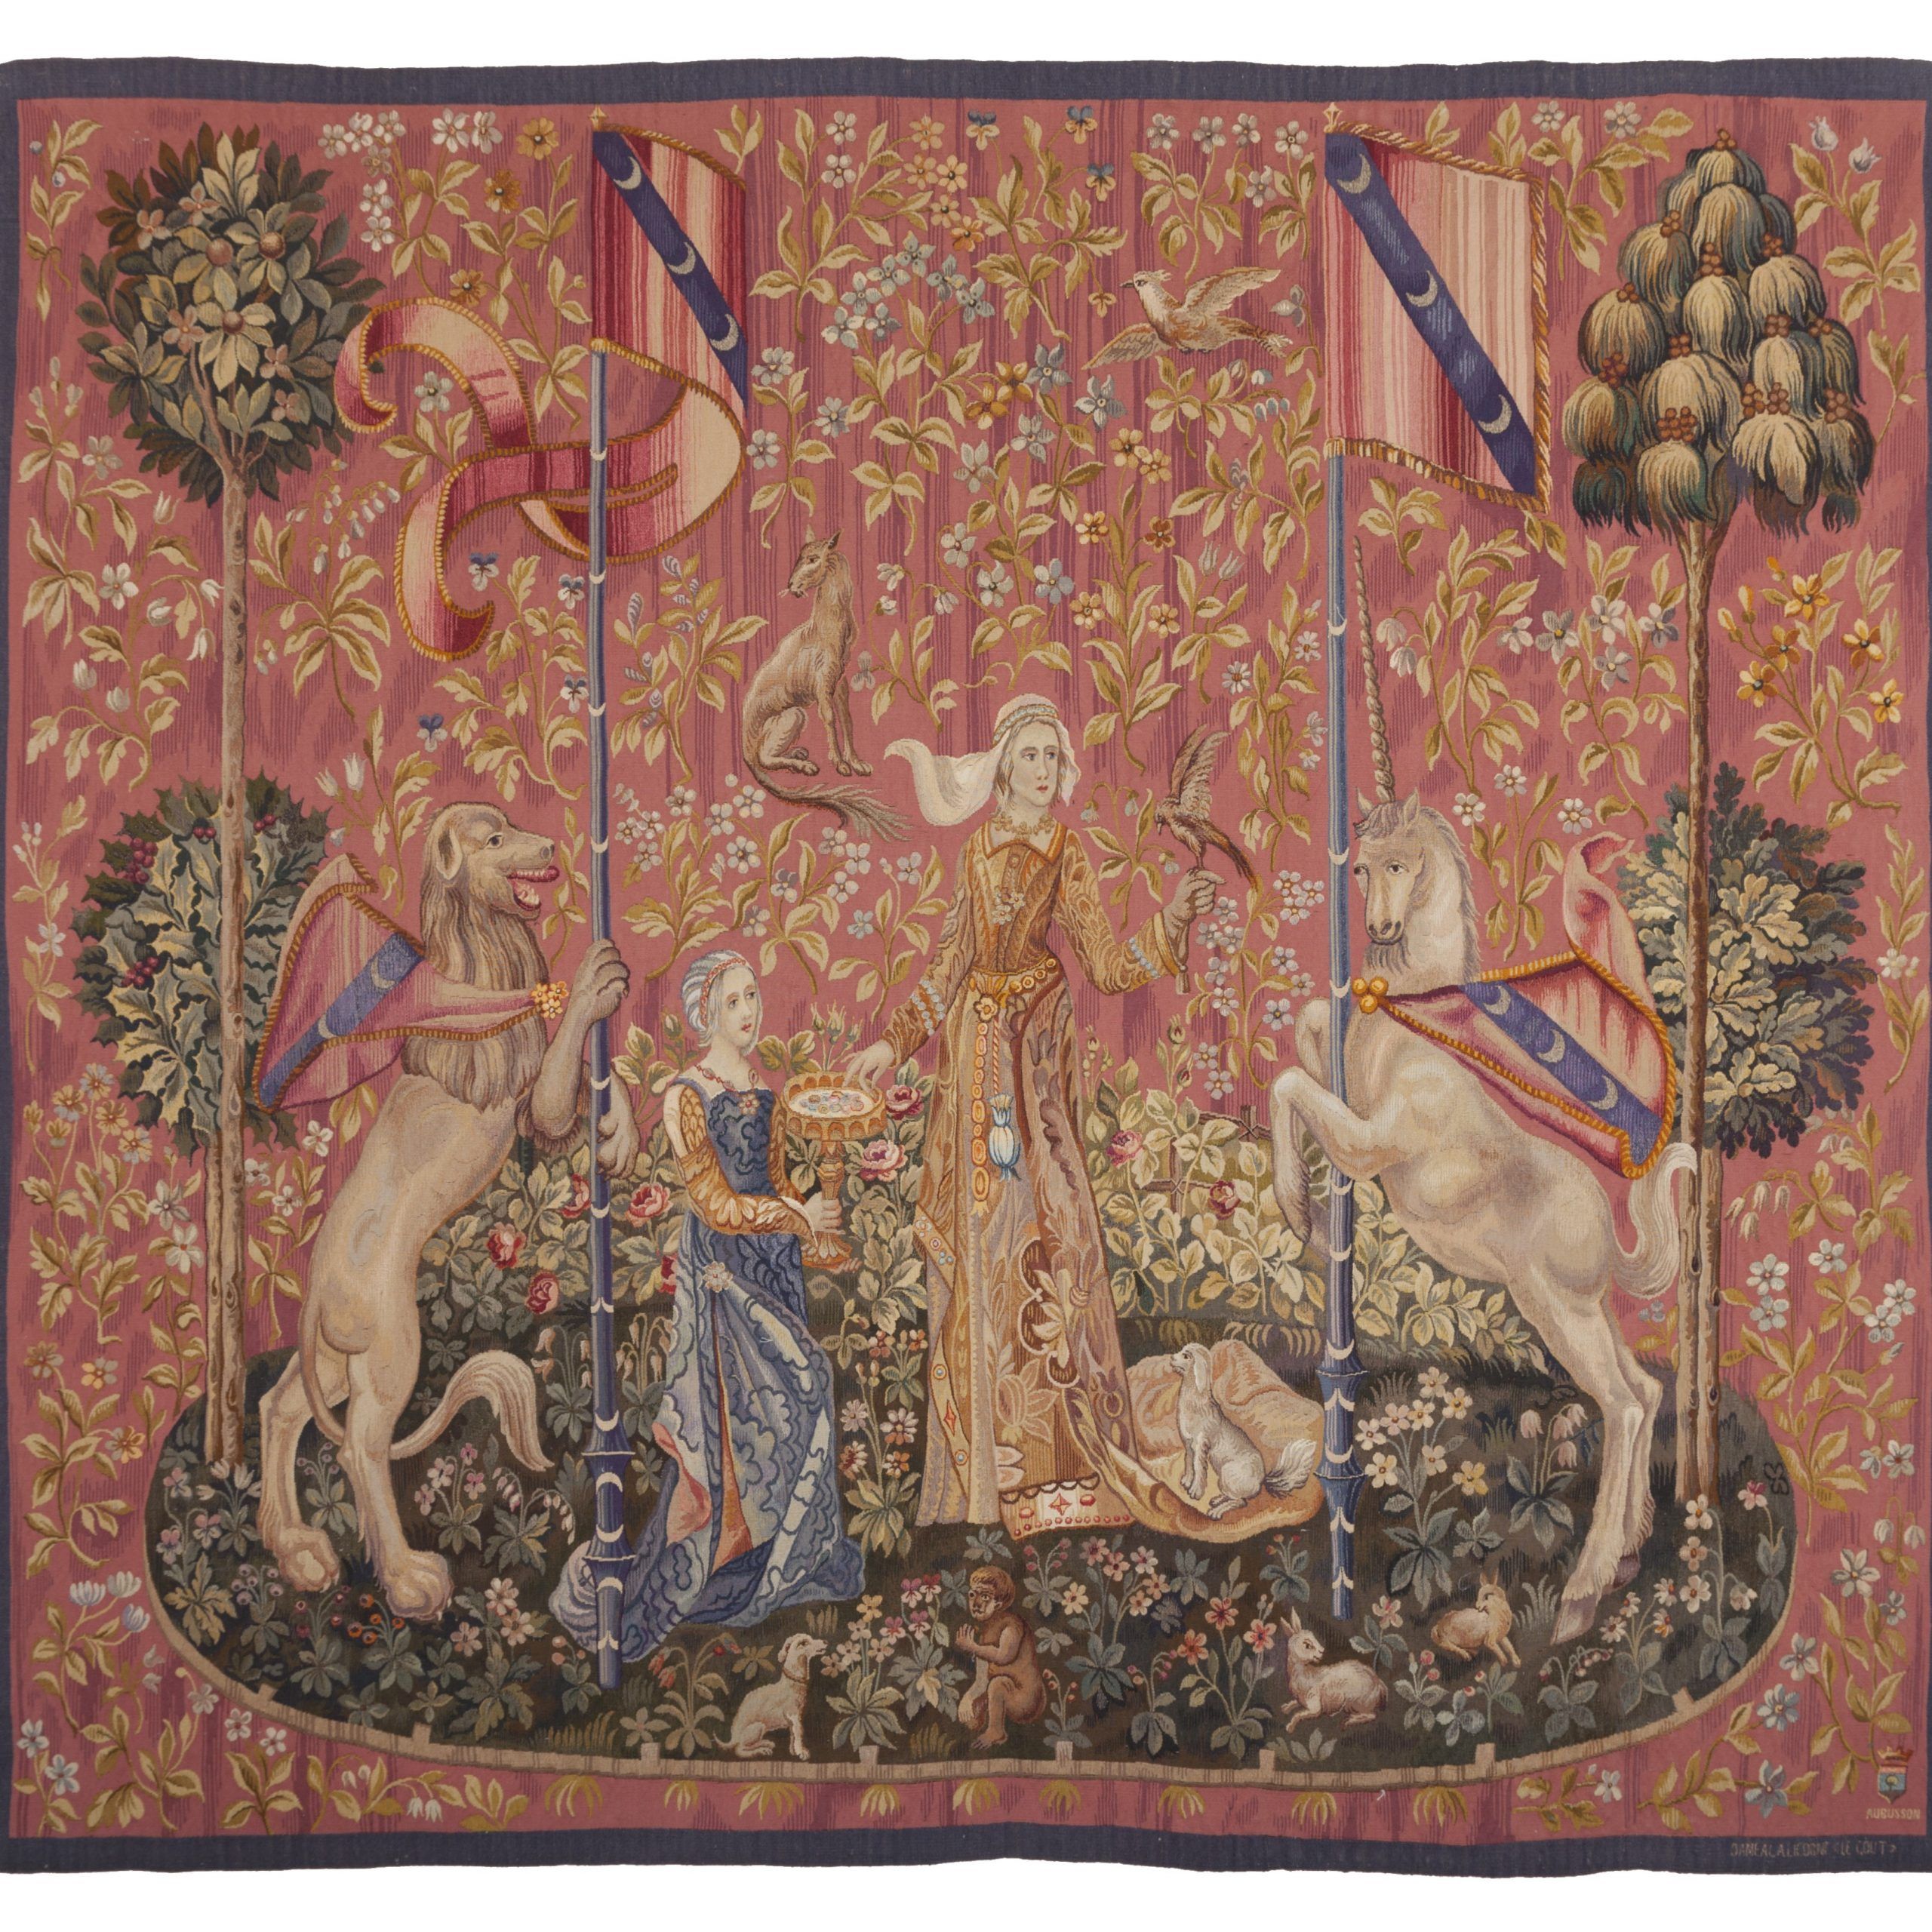 Dame A La Licorne 'le Gout' Antique Original Tapestry Pertaining To Most Up To Date Dame A La Licorne I Tapestries (View 7 of 20)